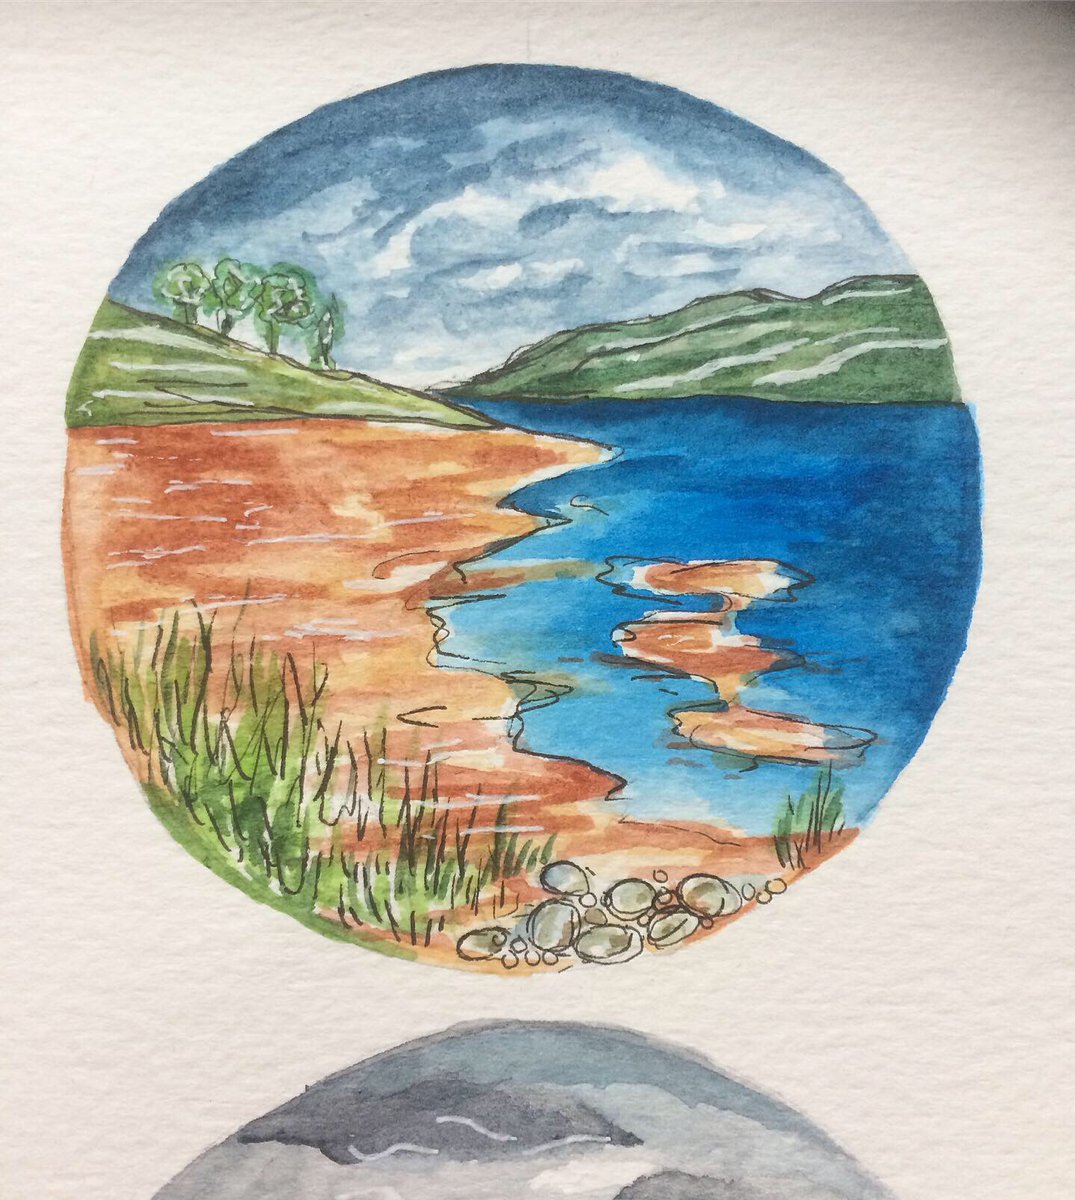 Had fun working on a potential new commission idea today - watch this space 🌿 #watercolour #watercolor #art #nature #landscape #painting #isleofbute #ardvreckcastle #sutherland #rackwick #orkneyisles